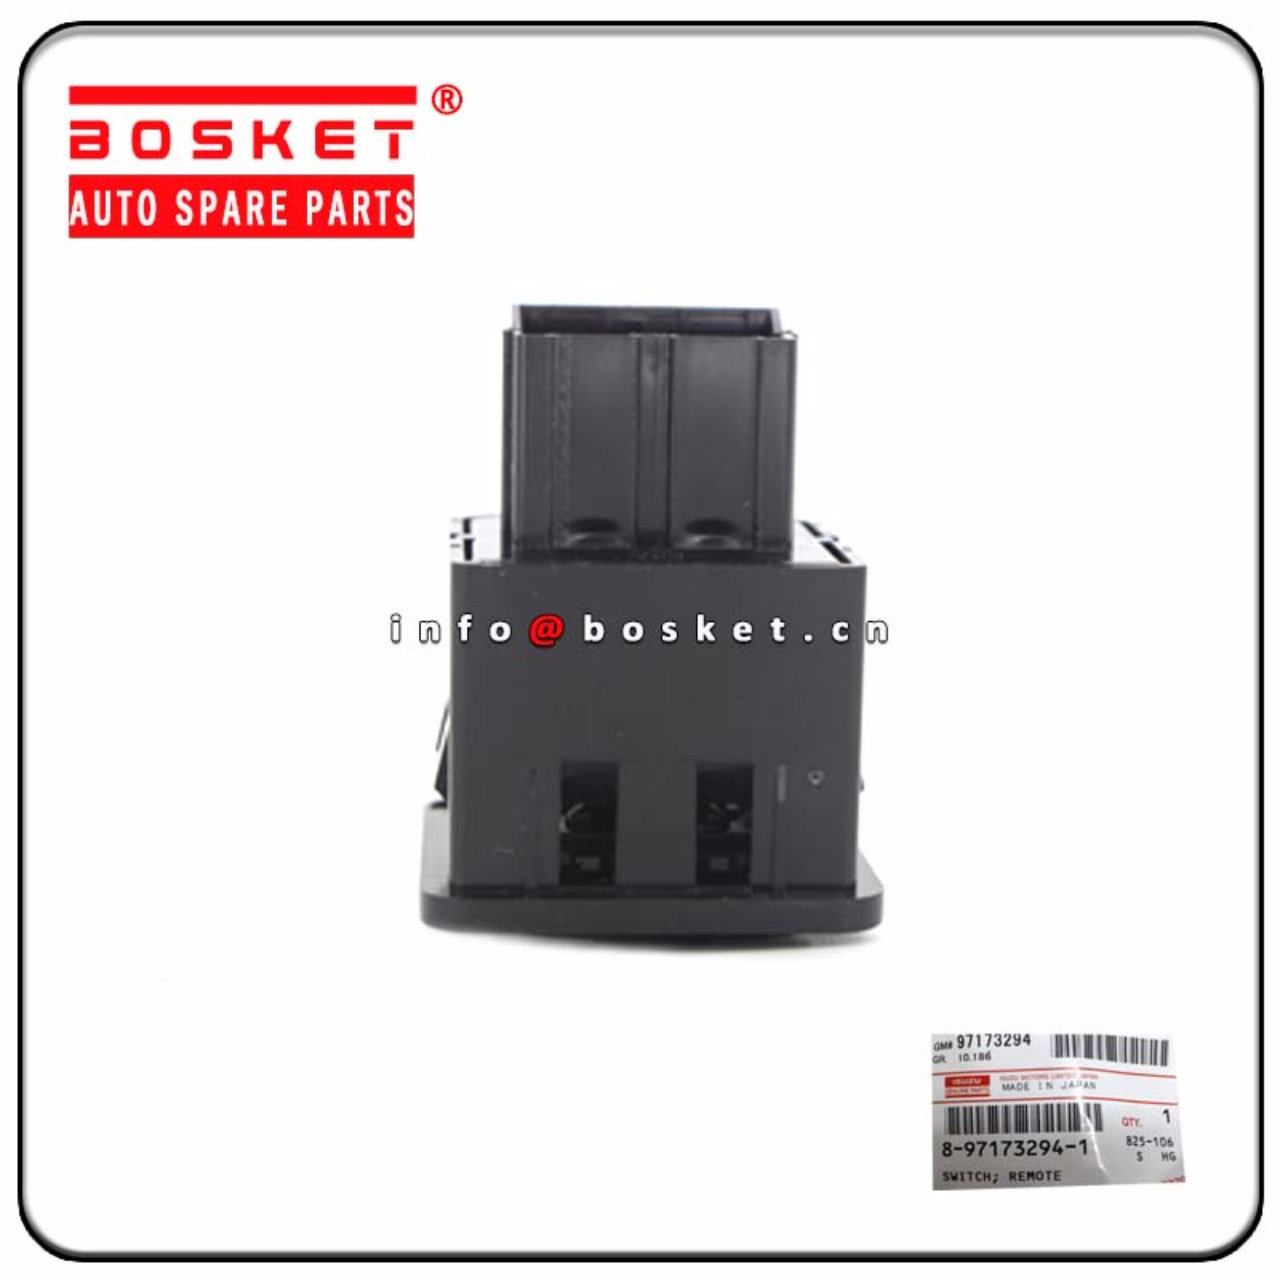 8-97173294-1 8971732941 Remote Control Mirror Switch Suitable for ISUZU NKR81 NPR